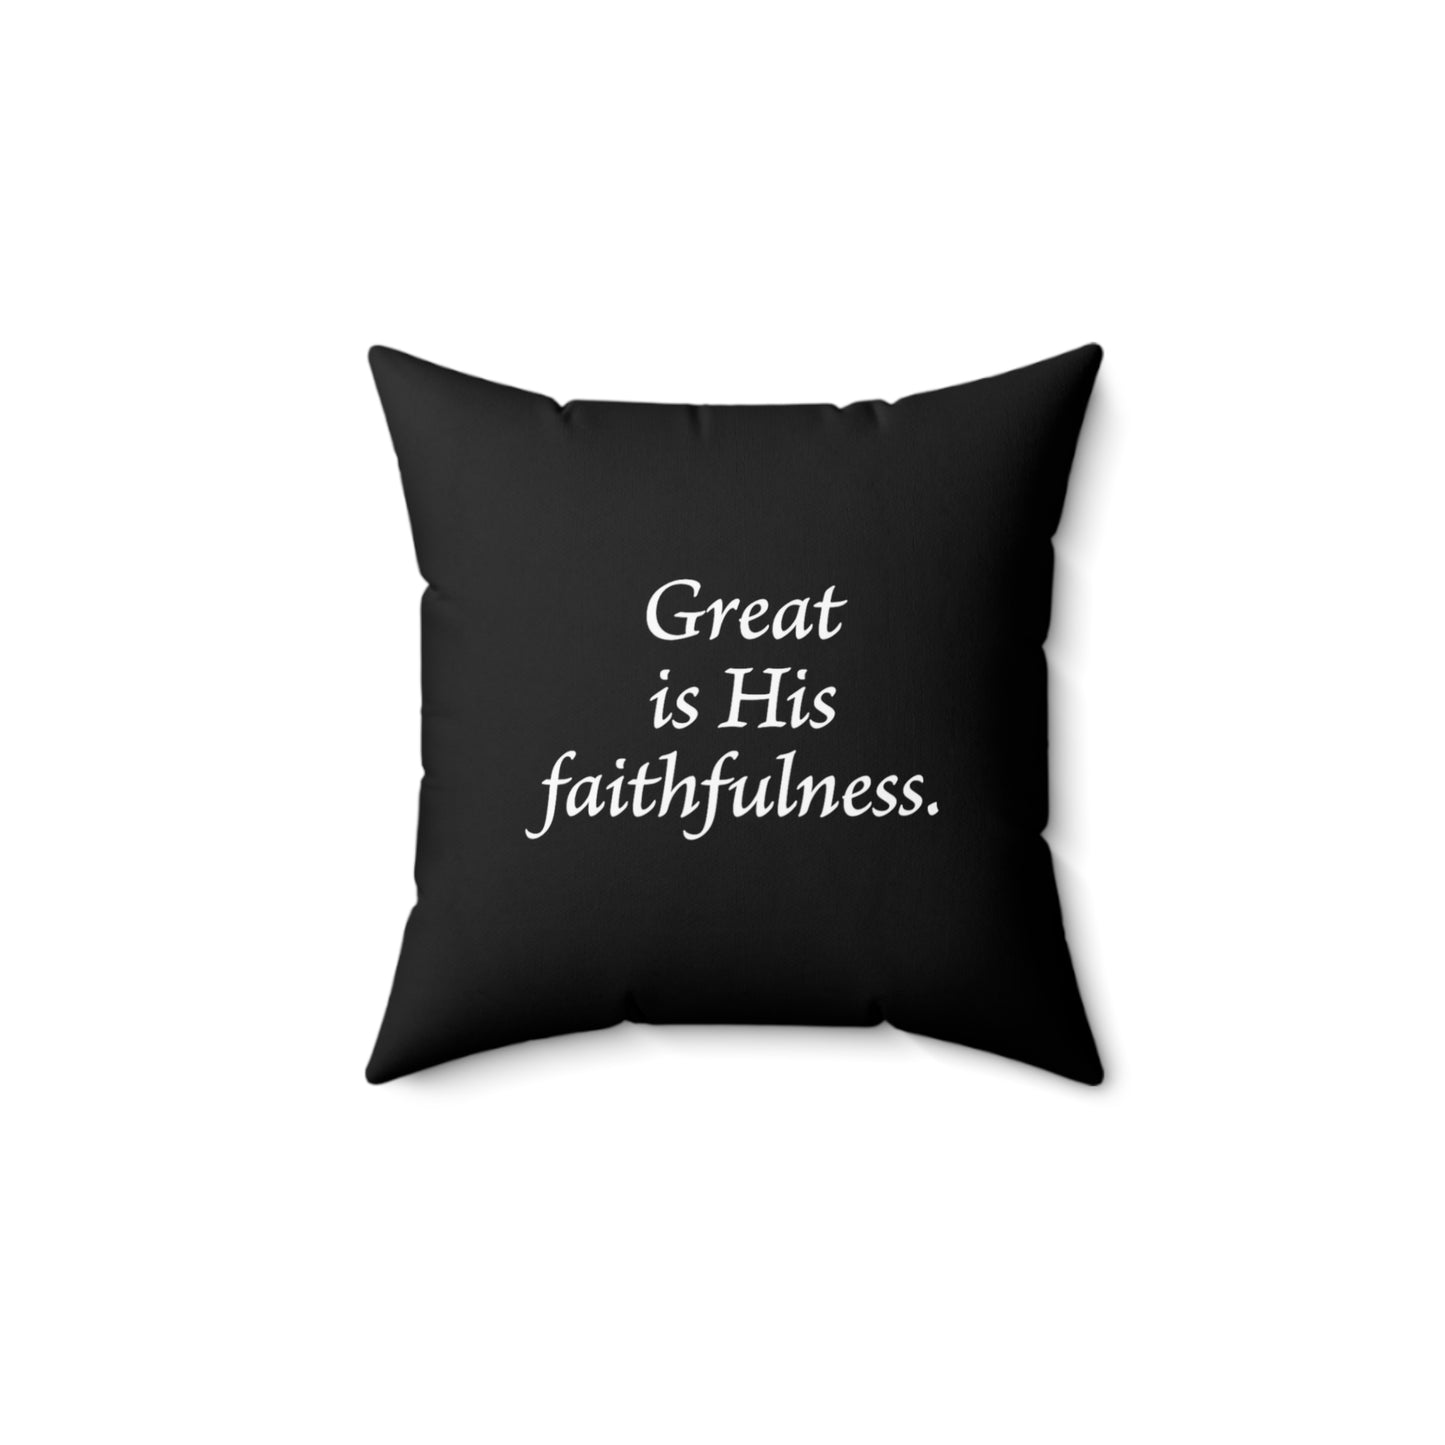 Spun Polyester Square Pillow - Great is His Faithfulness